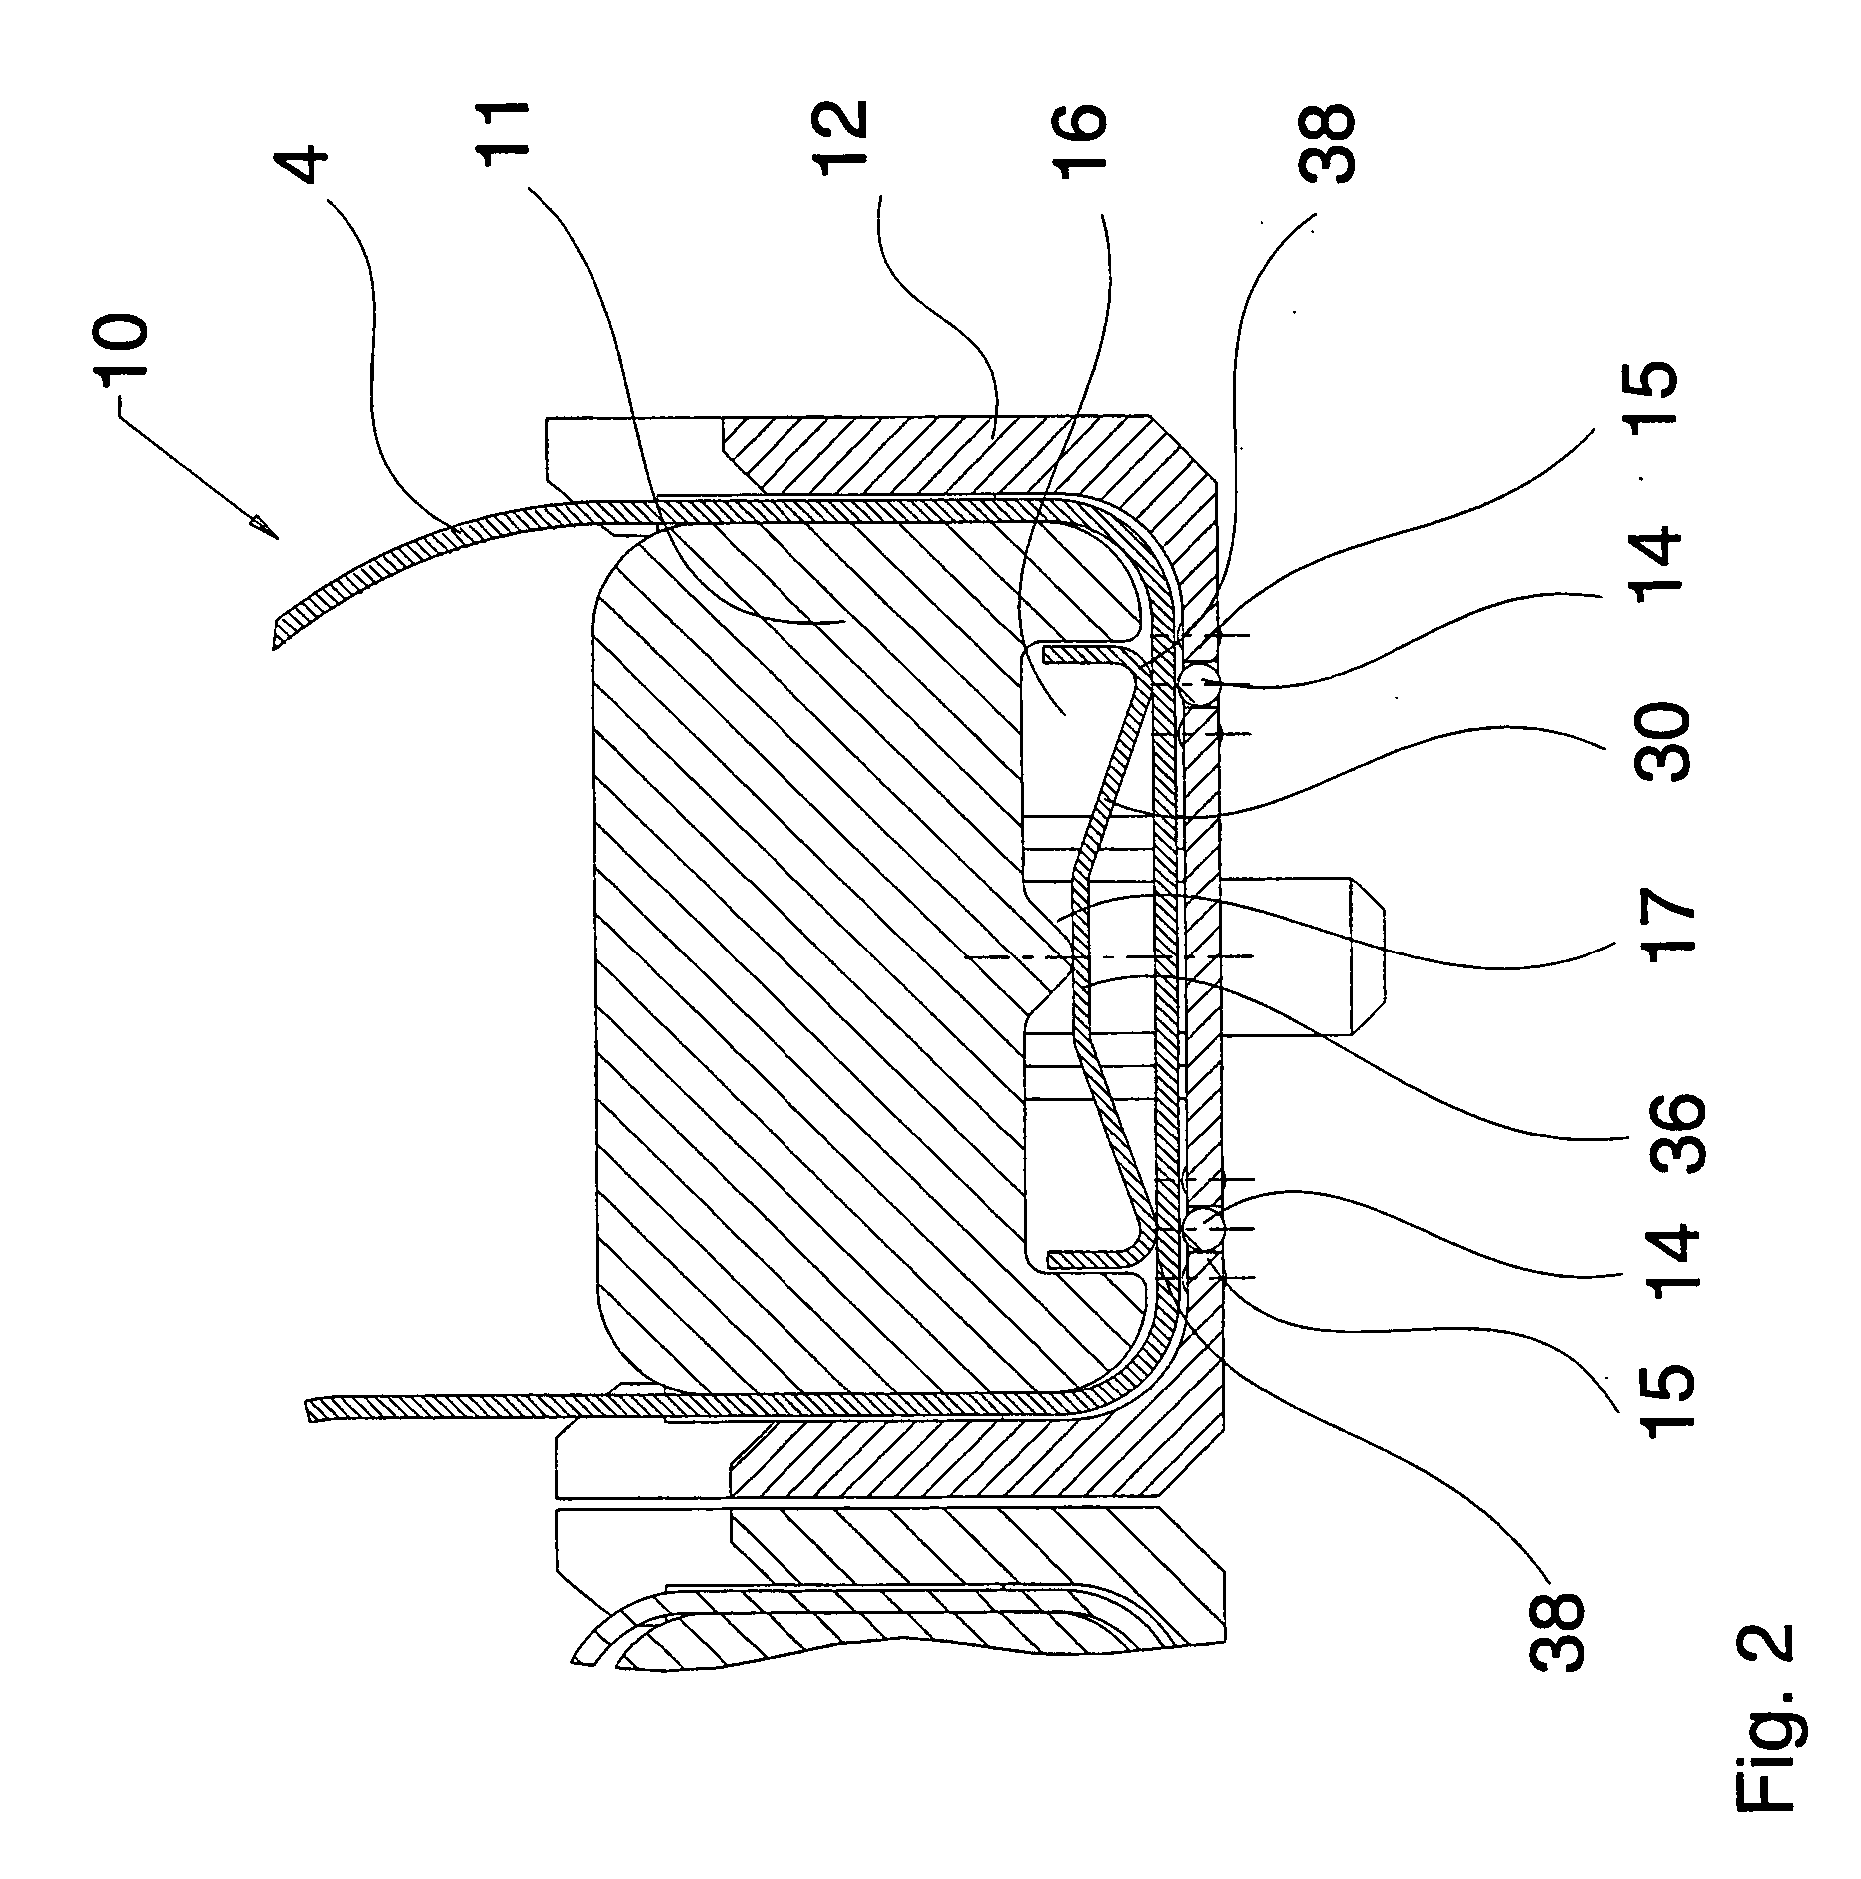 Connector for connecting printed circuit boards